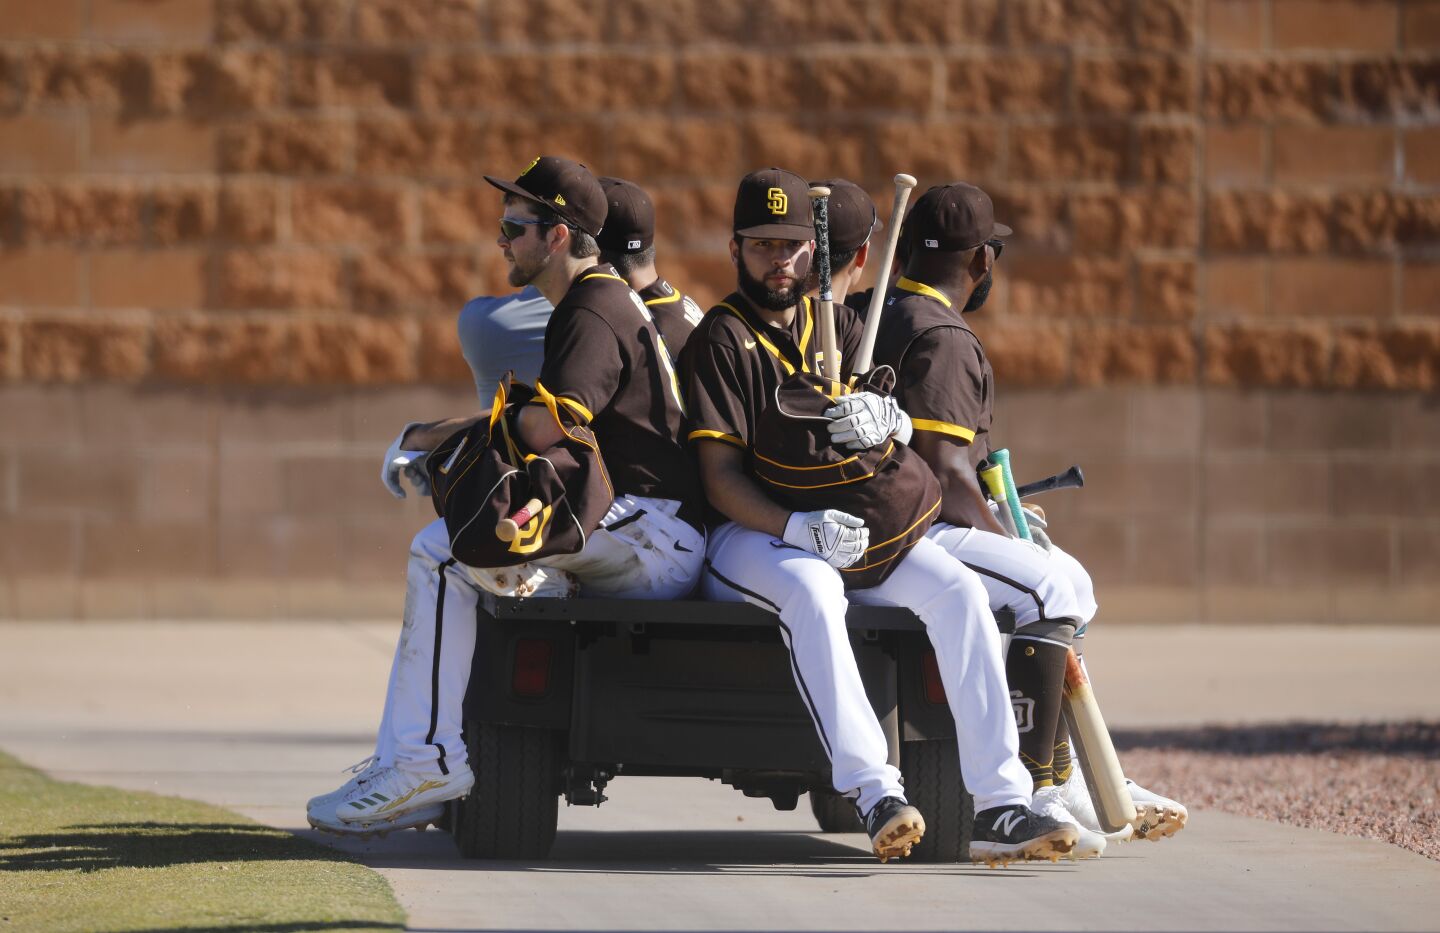 San Diego Padres players ride on a golf cart to a field during a spring training practice on Feb. 20, 2020.